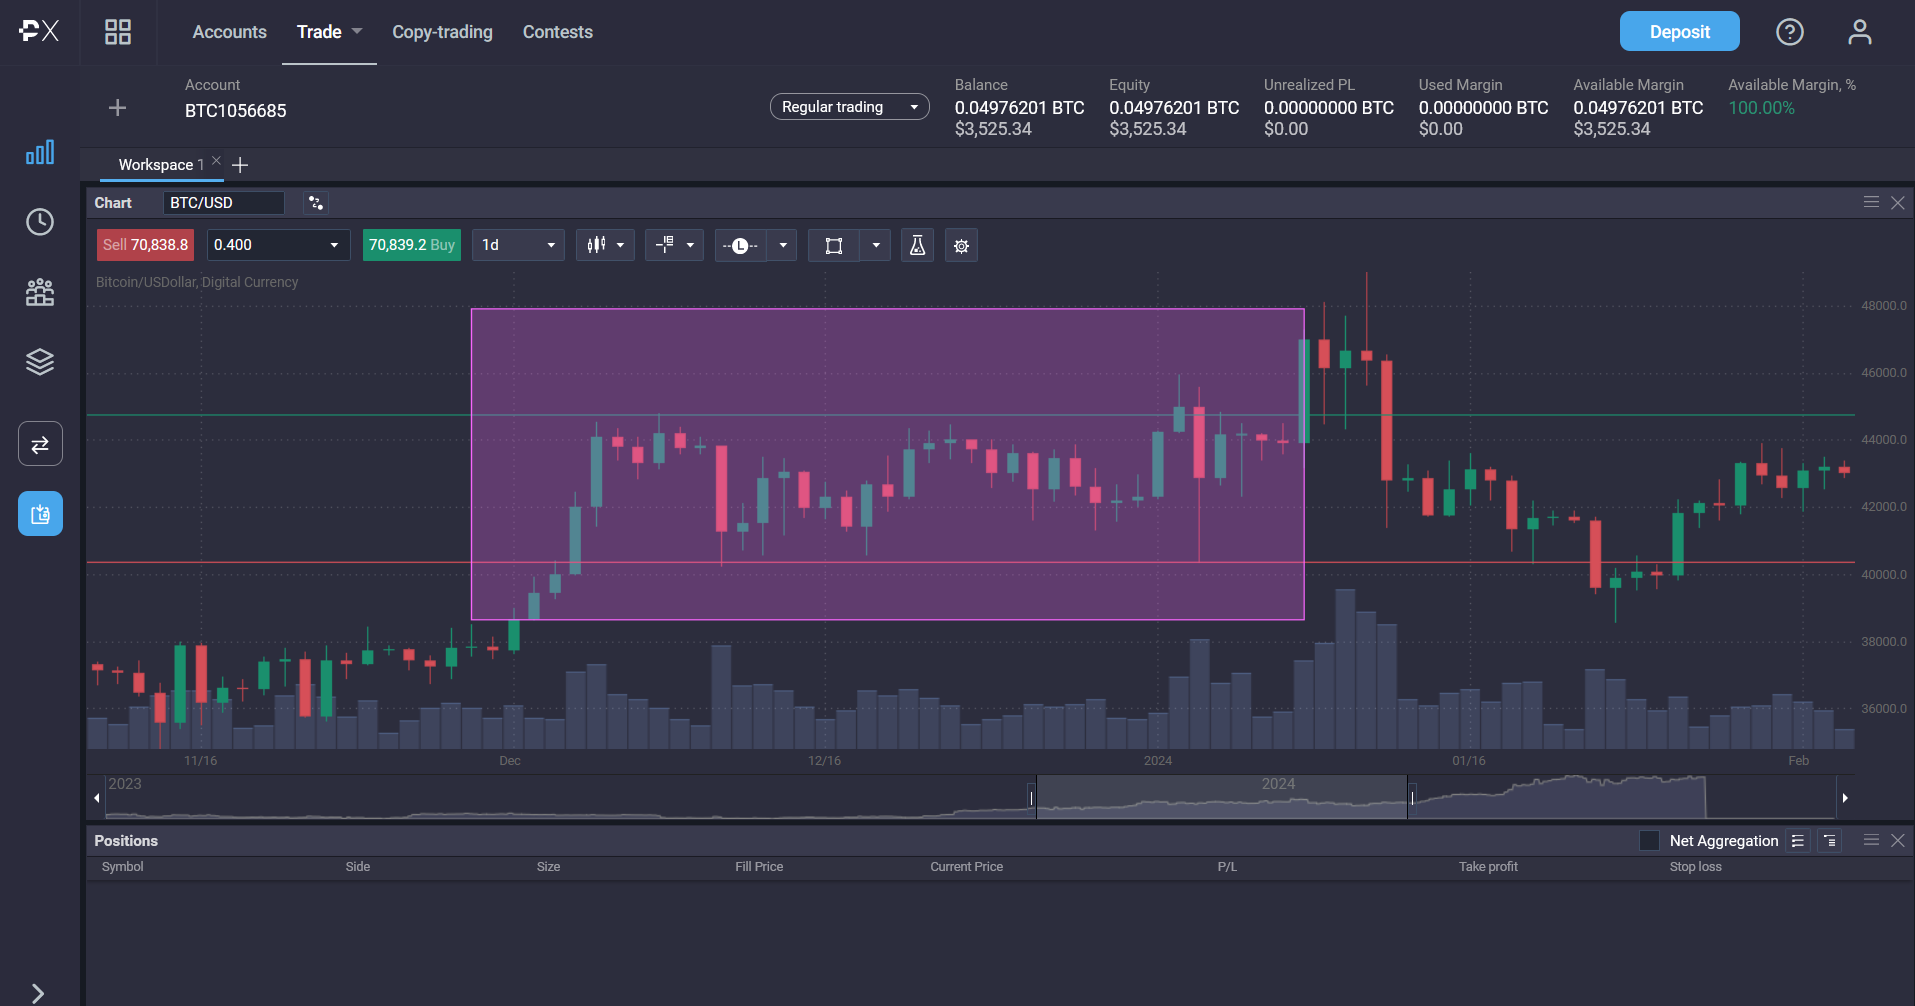 Crypto day trading: strategies, risks, and rewards - 83452d4b 7a0d 4951 9de7 5dc768f895b9